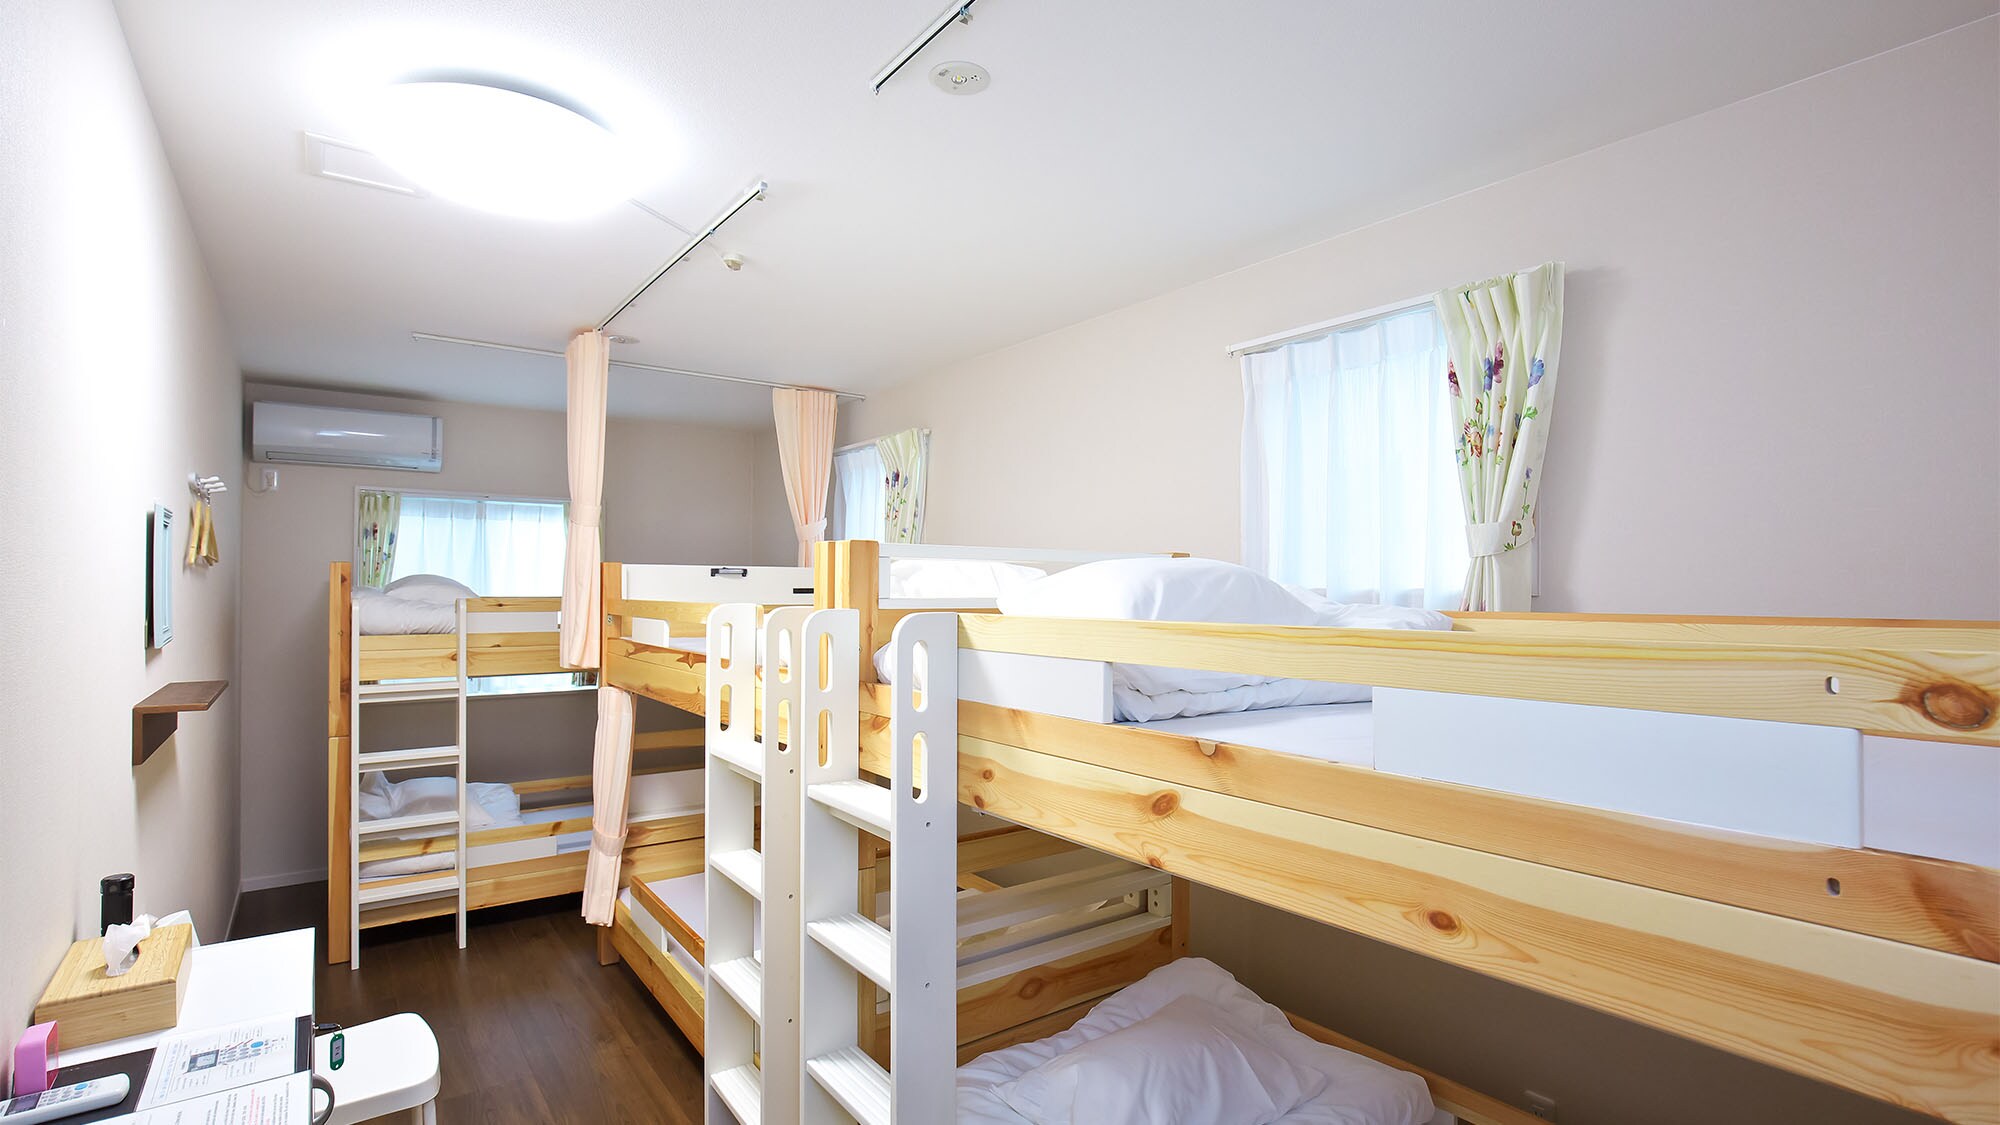 ・ <Women-only dormitory> Guest room with wooden bunk beds. Usually it will be a shared room